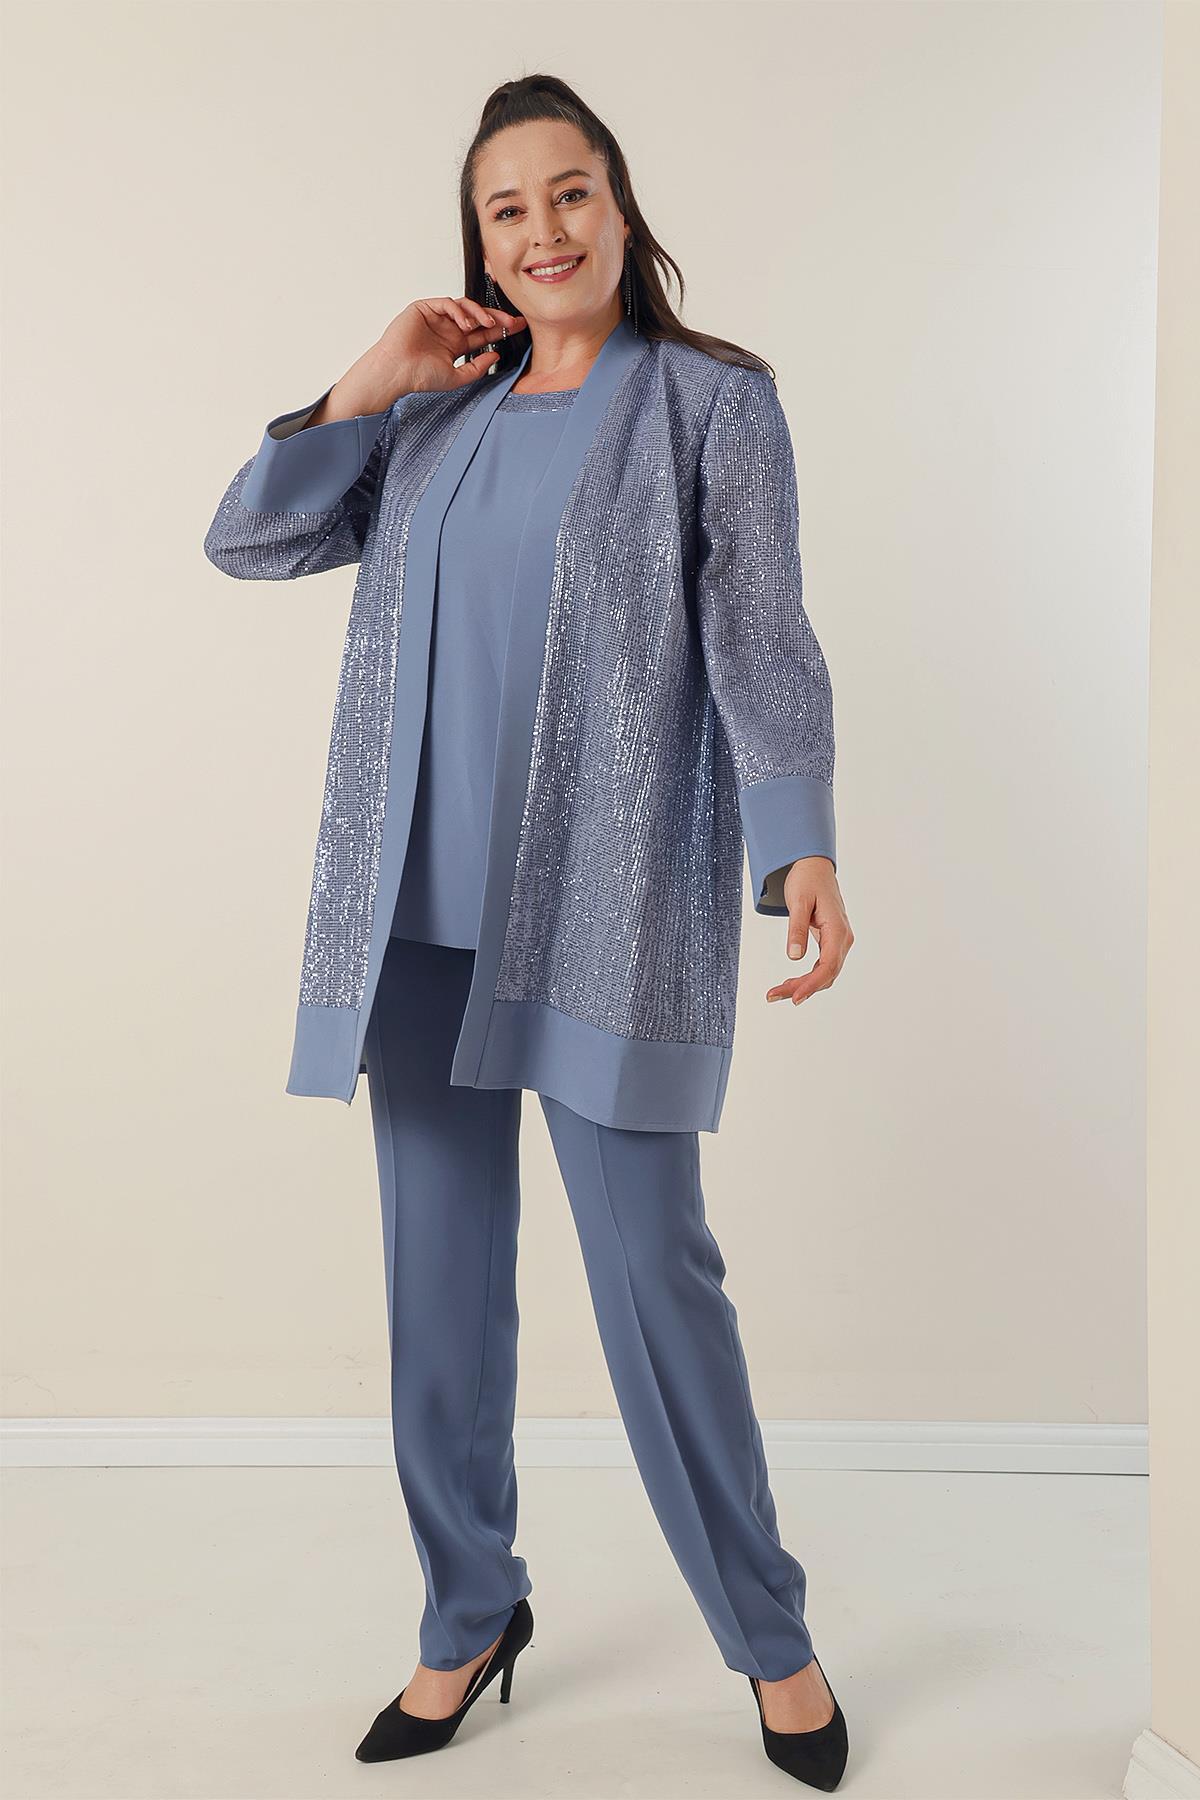 By Saygı Plus Size 3-piece Set with A Jacket, Blouse and Pants with sequin Detail.